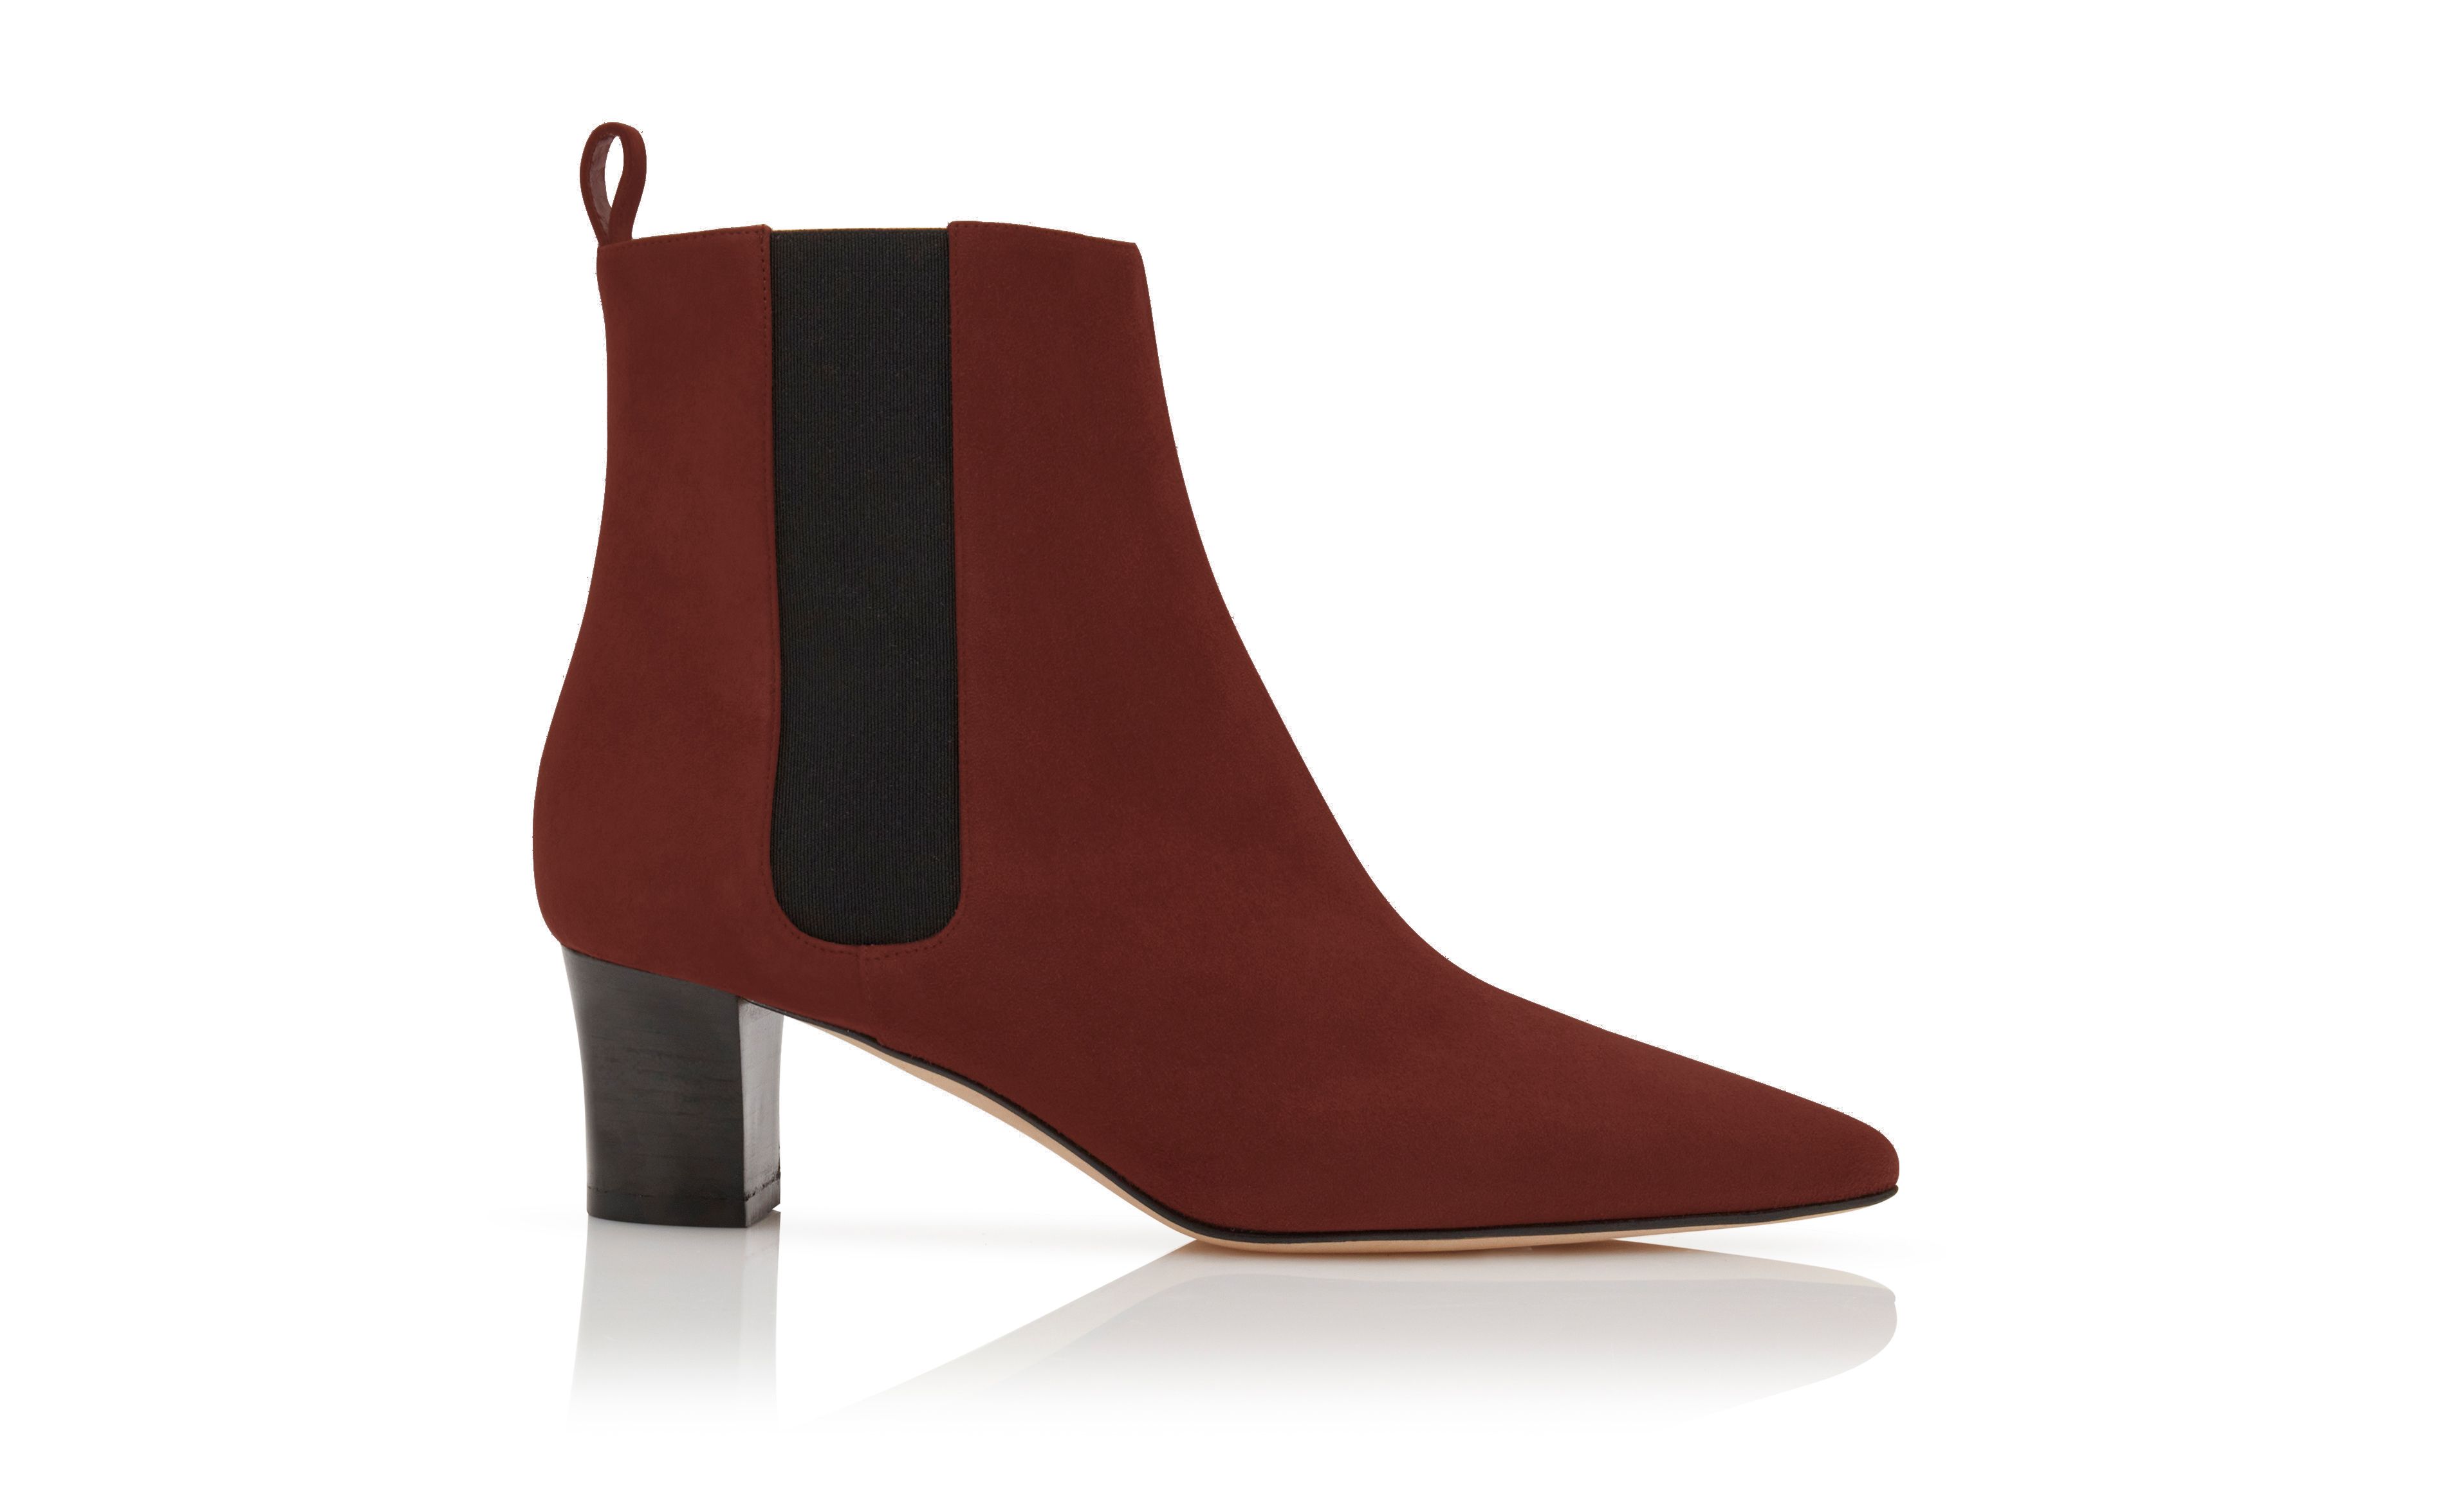 Designer Terracotta Red Suede Ankle Boots - Image Side View